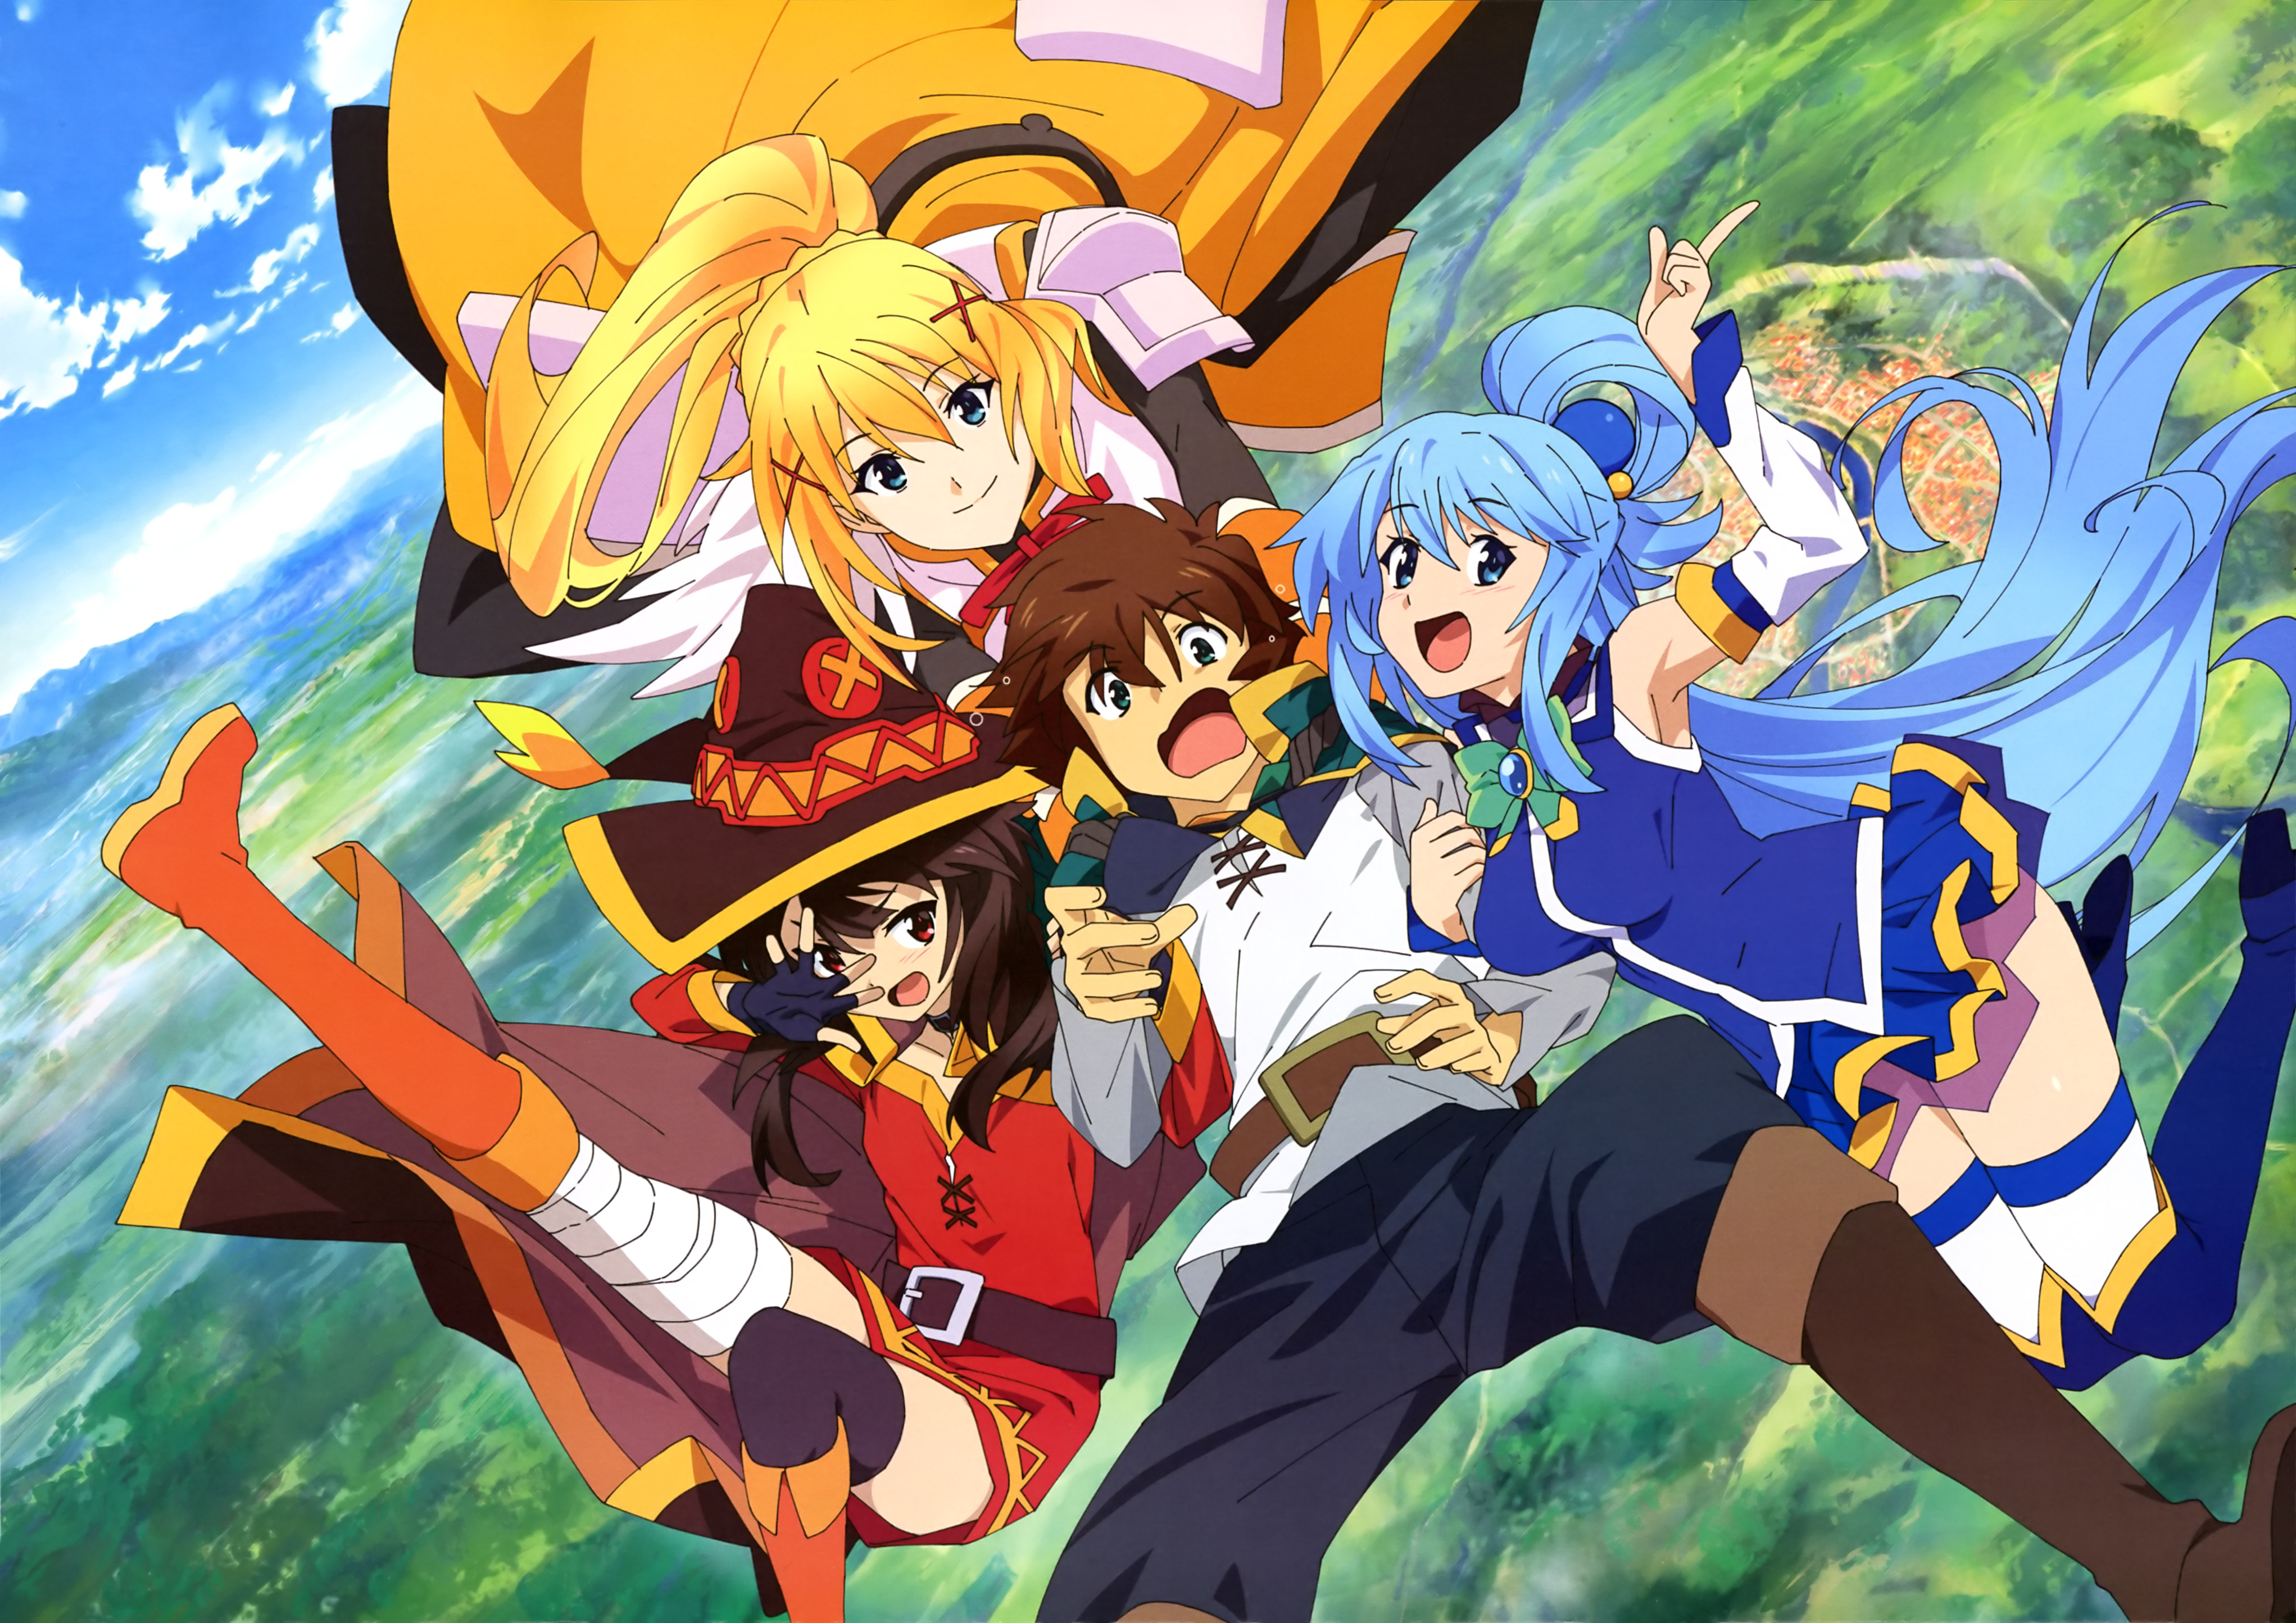 1920 X 1080] A wallpaper of the anime Konosuba I made. Took me 3 hours(  It's my first wallpaper)